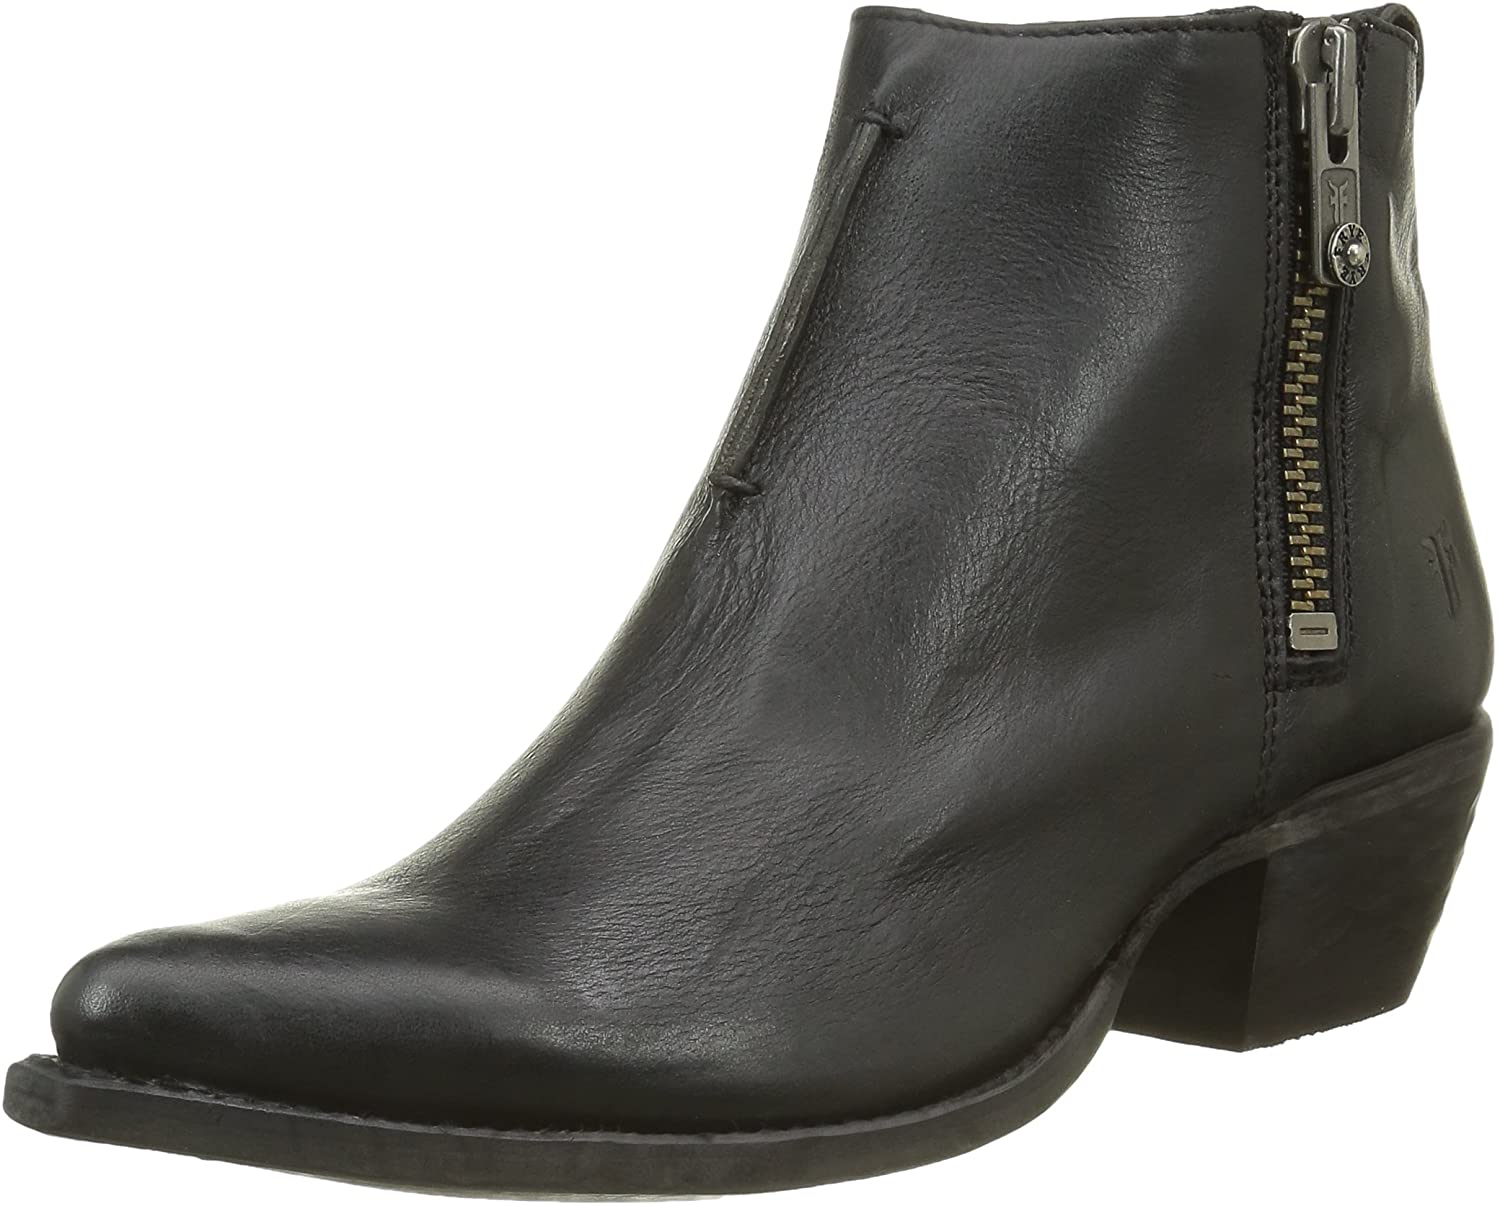 Frye Womens Sacha Leather Almond Toe Ankle Fashion Boots, Black, Size 6 ...